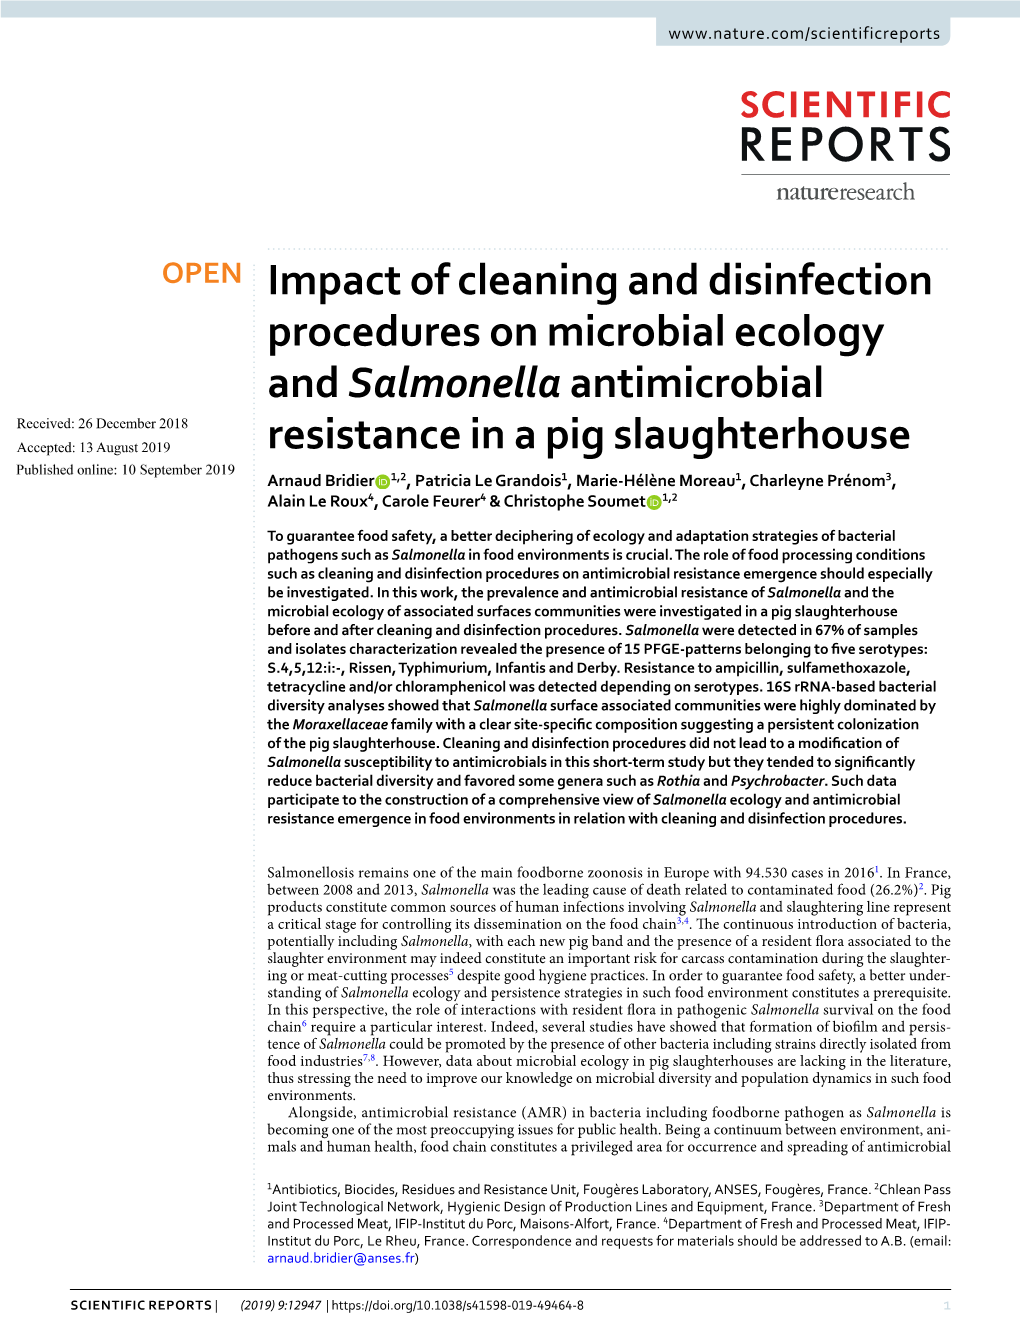 Impact of Cleaning and Disinfection Procedures on Microbial Ecology and Salmonella Antimicrobial Resistance in a Pig Slaughterho